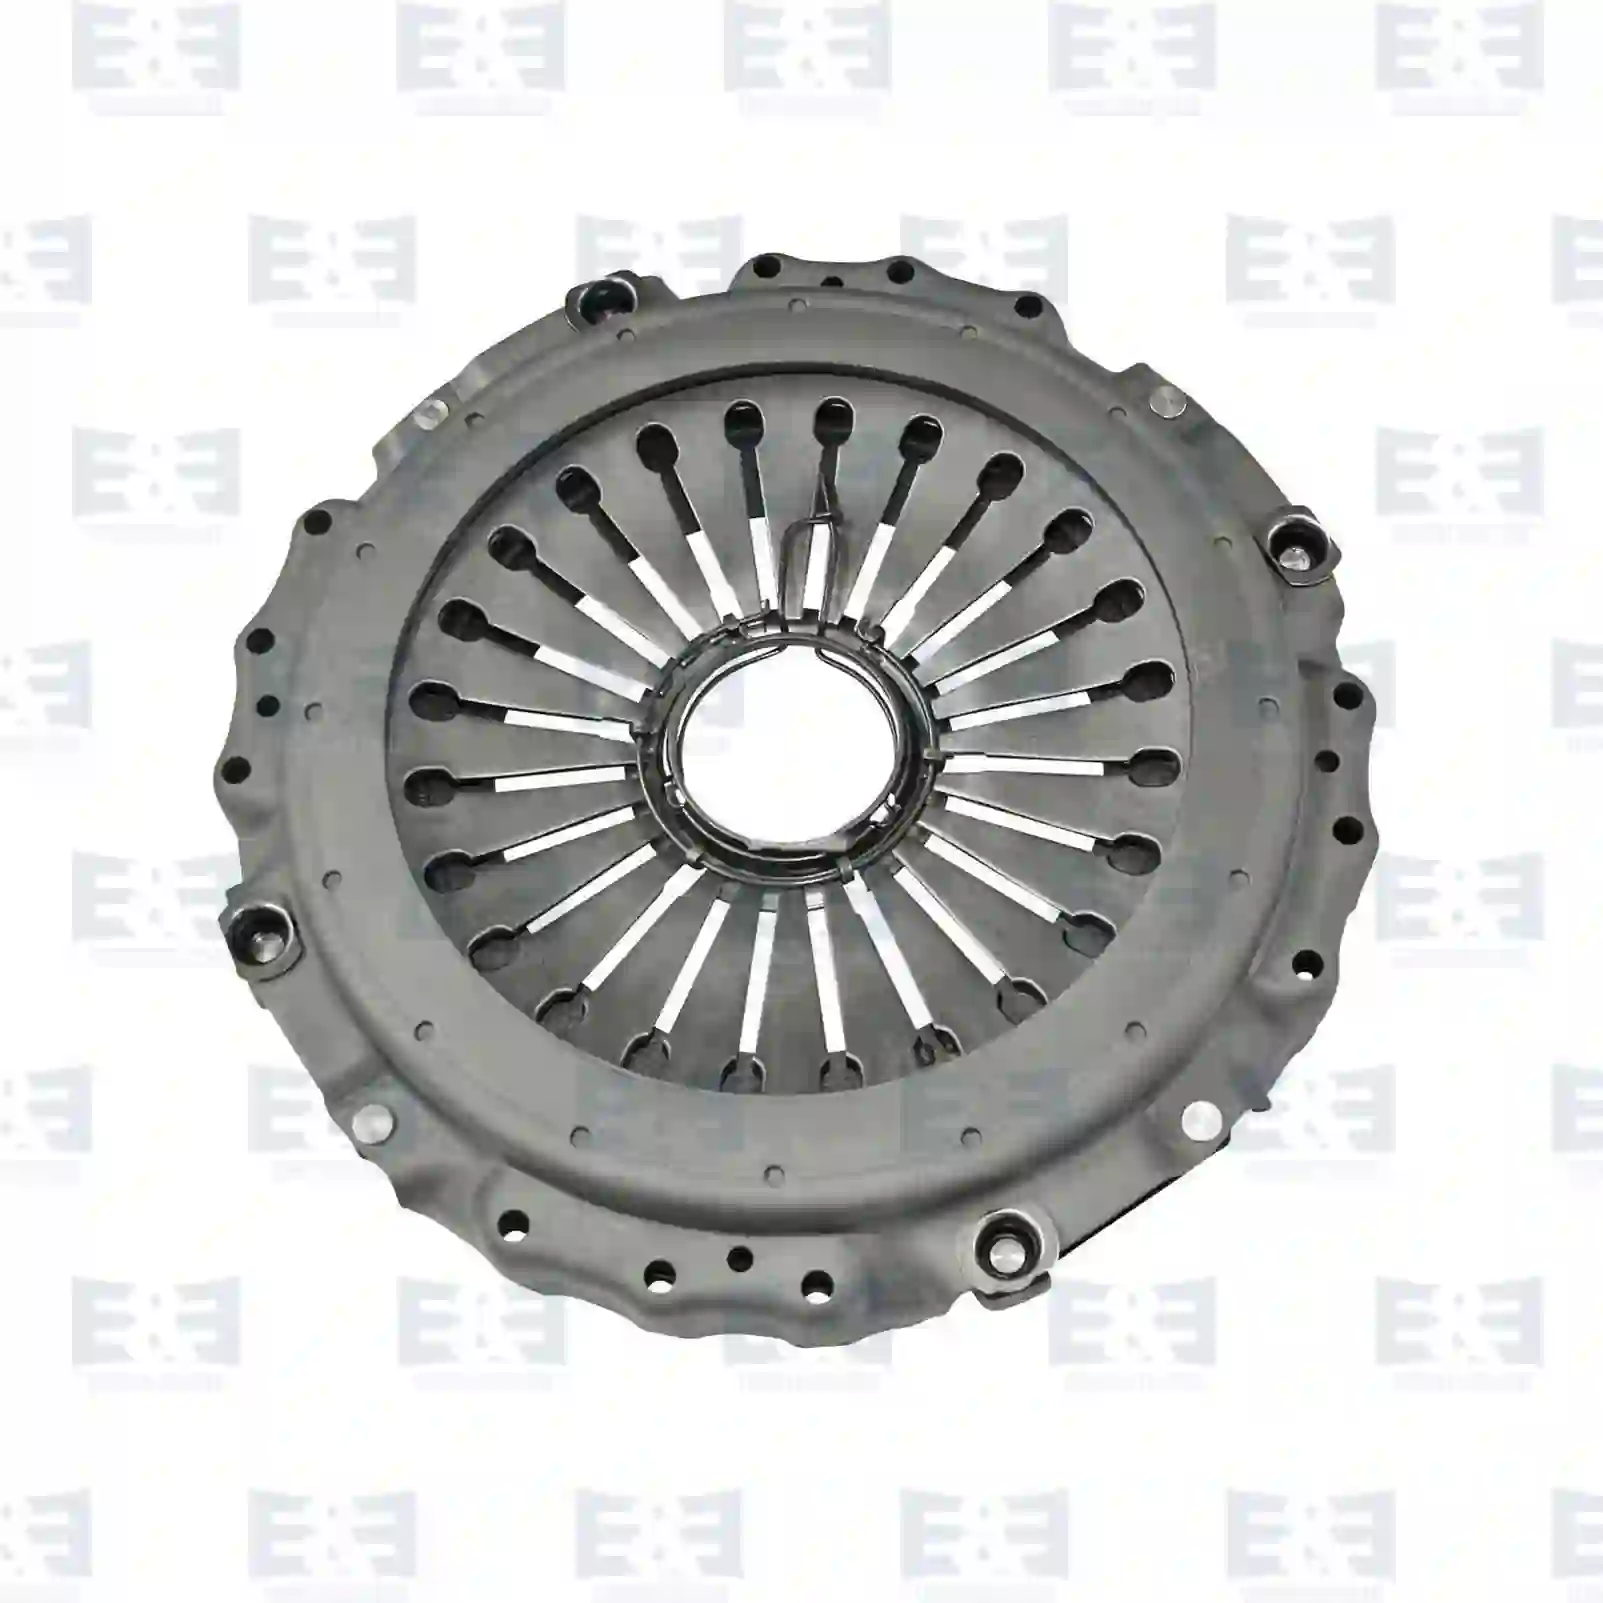  Clutch Kit (Cover & Disc) Clutch cover, EE No 2E2289225 ,  oem no:503118808, 81303050204, 81303050214, 81303050219, 81303050221, 81303050229, 81303050239, 81303059204, 81303059219, 81303059221, 81303059229, 5010545836, 518312, 2V5141025A E&E Truck Spare Parts | Truck Spare Parts, Auotomotive Spare Parts